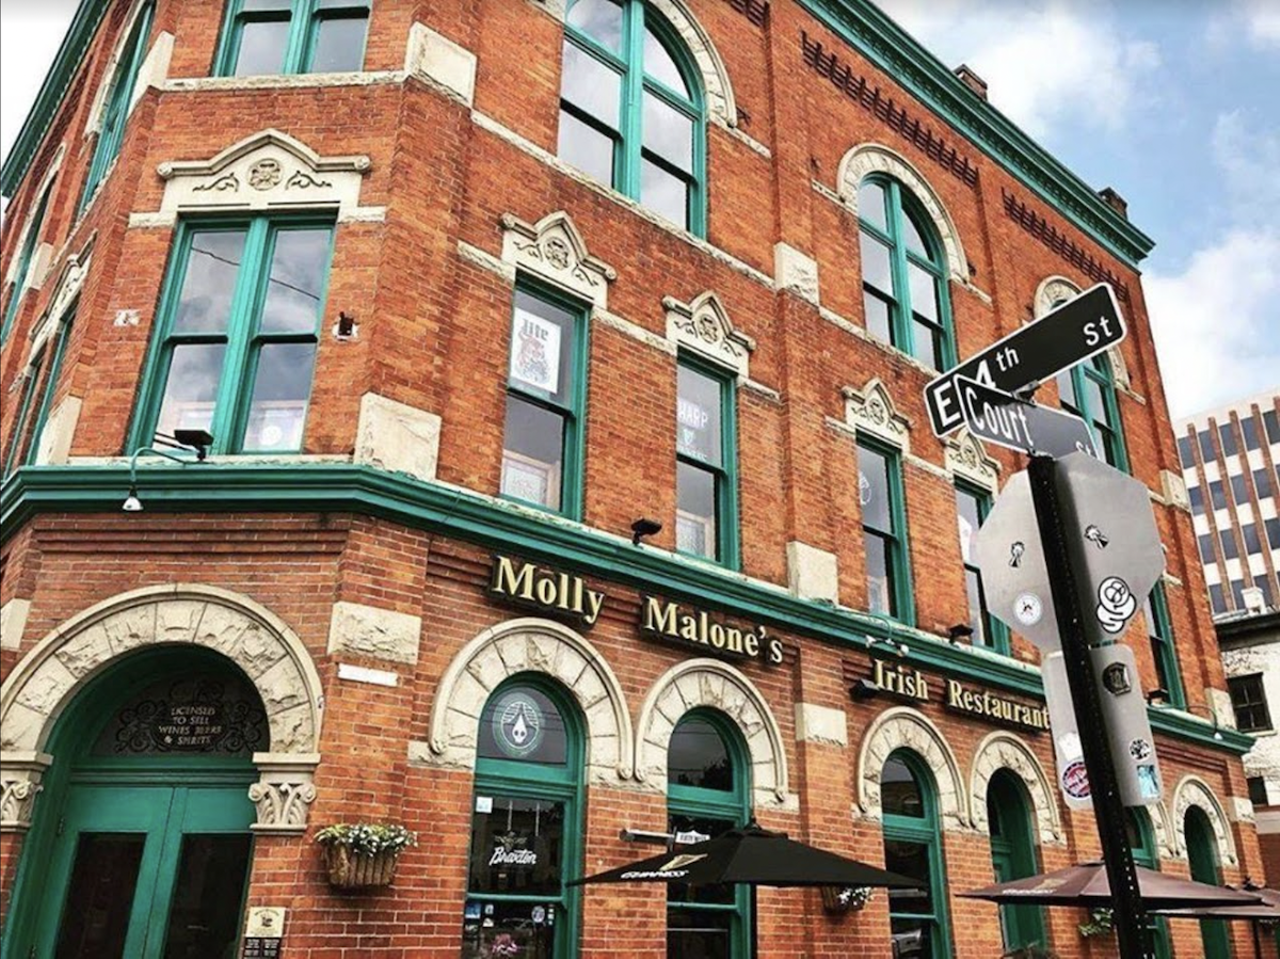 St. Paddy's Day Fest
When: March 17 at 7 a.m.
Where: Molly Malone's Irish Pub & Restaurant, Covington, Ky.
What: St. Patrick's Day festivities.
Who: Molly Malone's
Why: Molly's is one of the most popular St. Patrick's Day destinations in town.